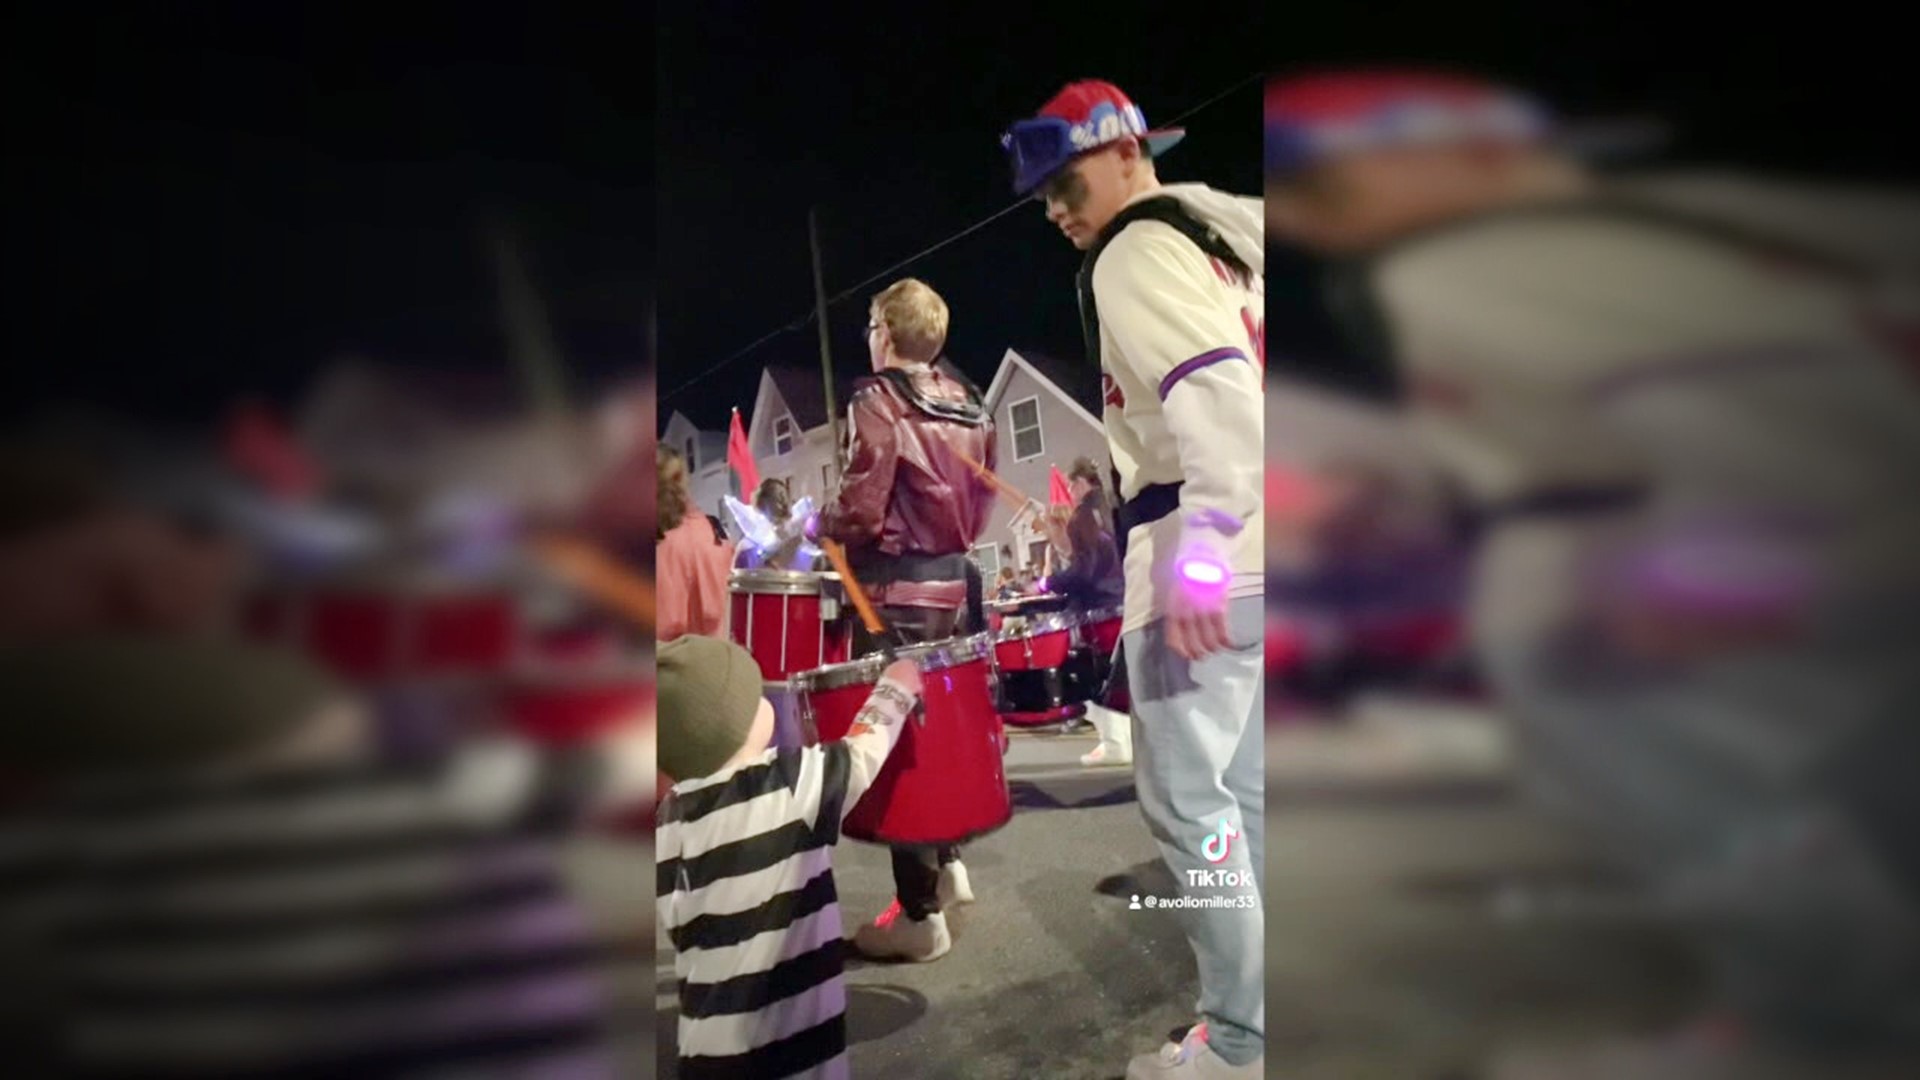 An act of kindness during a Halloween parade in Schuylkill County caught on camera is going viral.